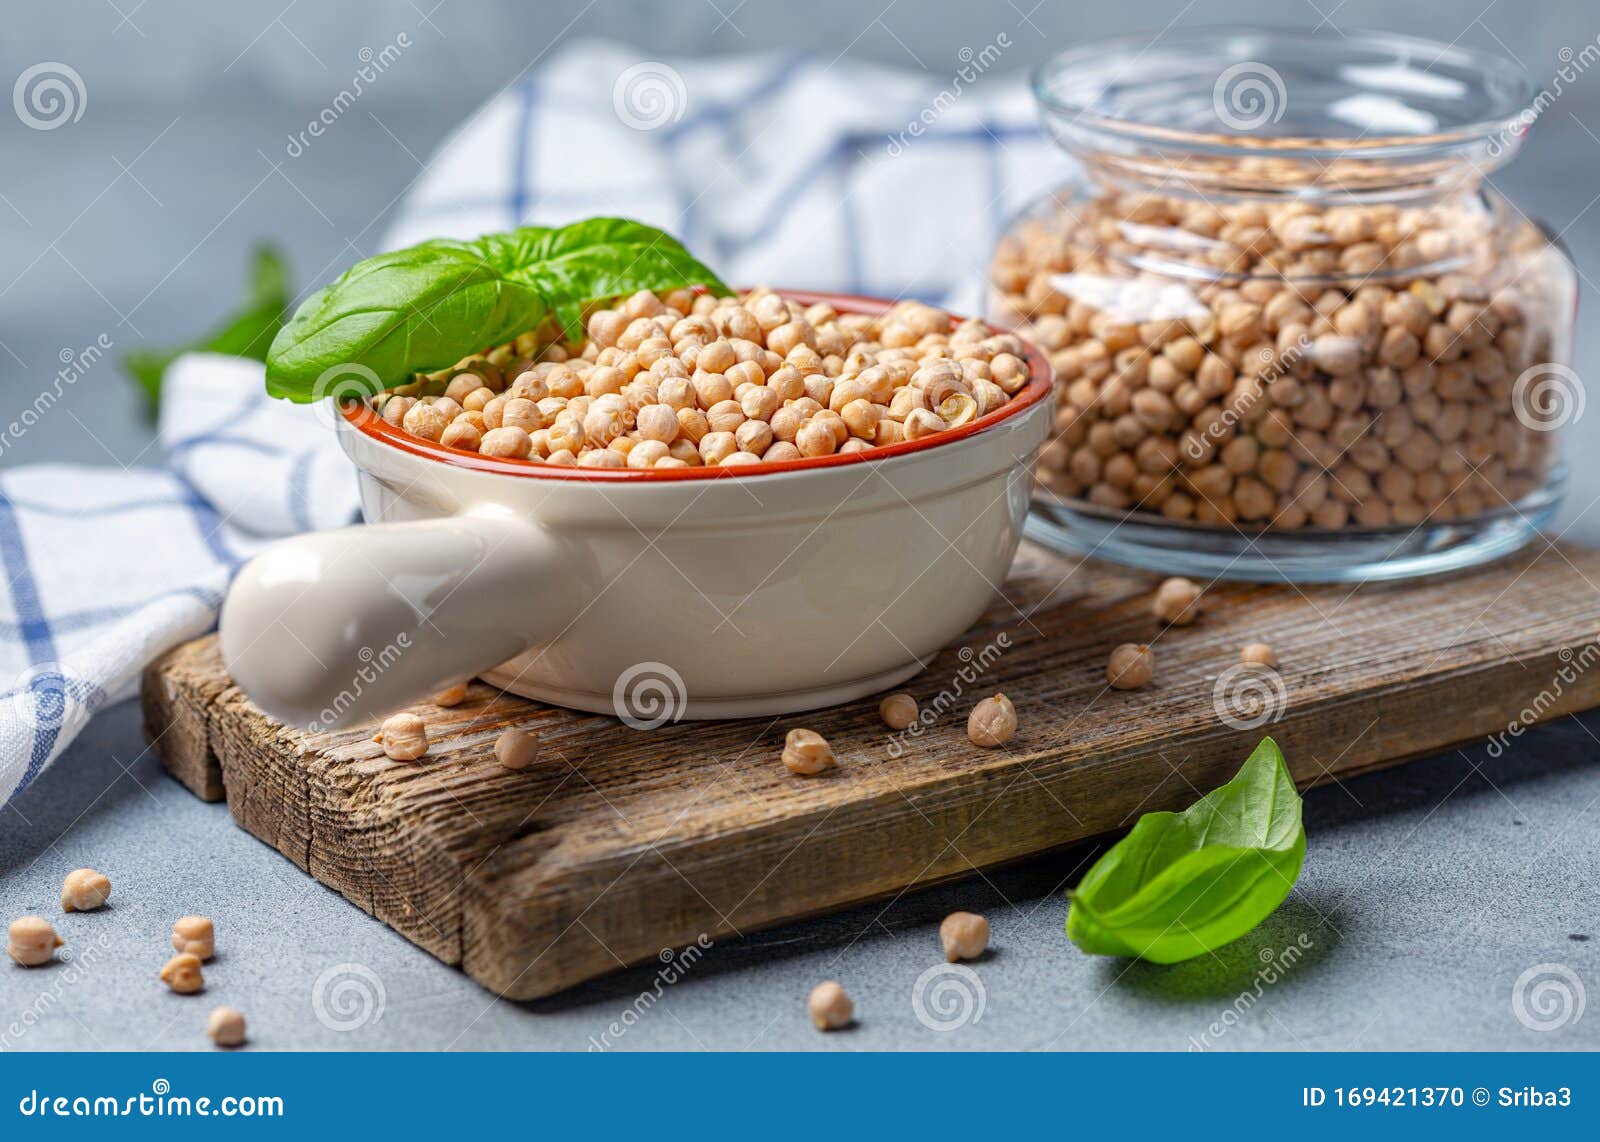 raw chickpeas and green basil